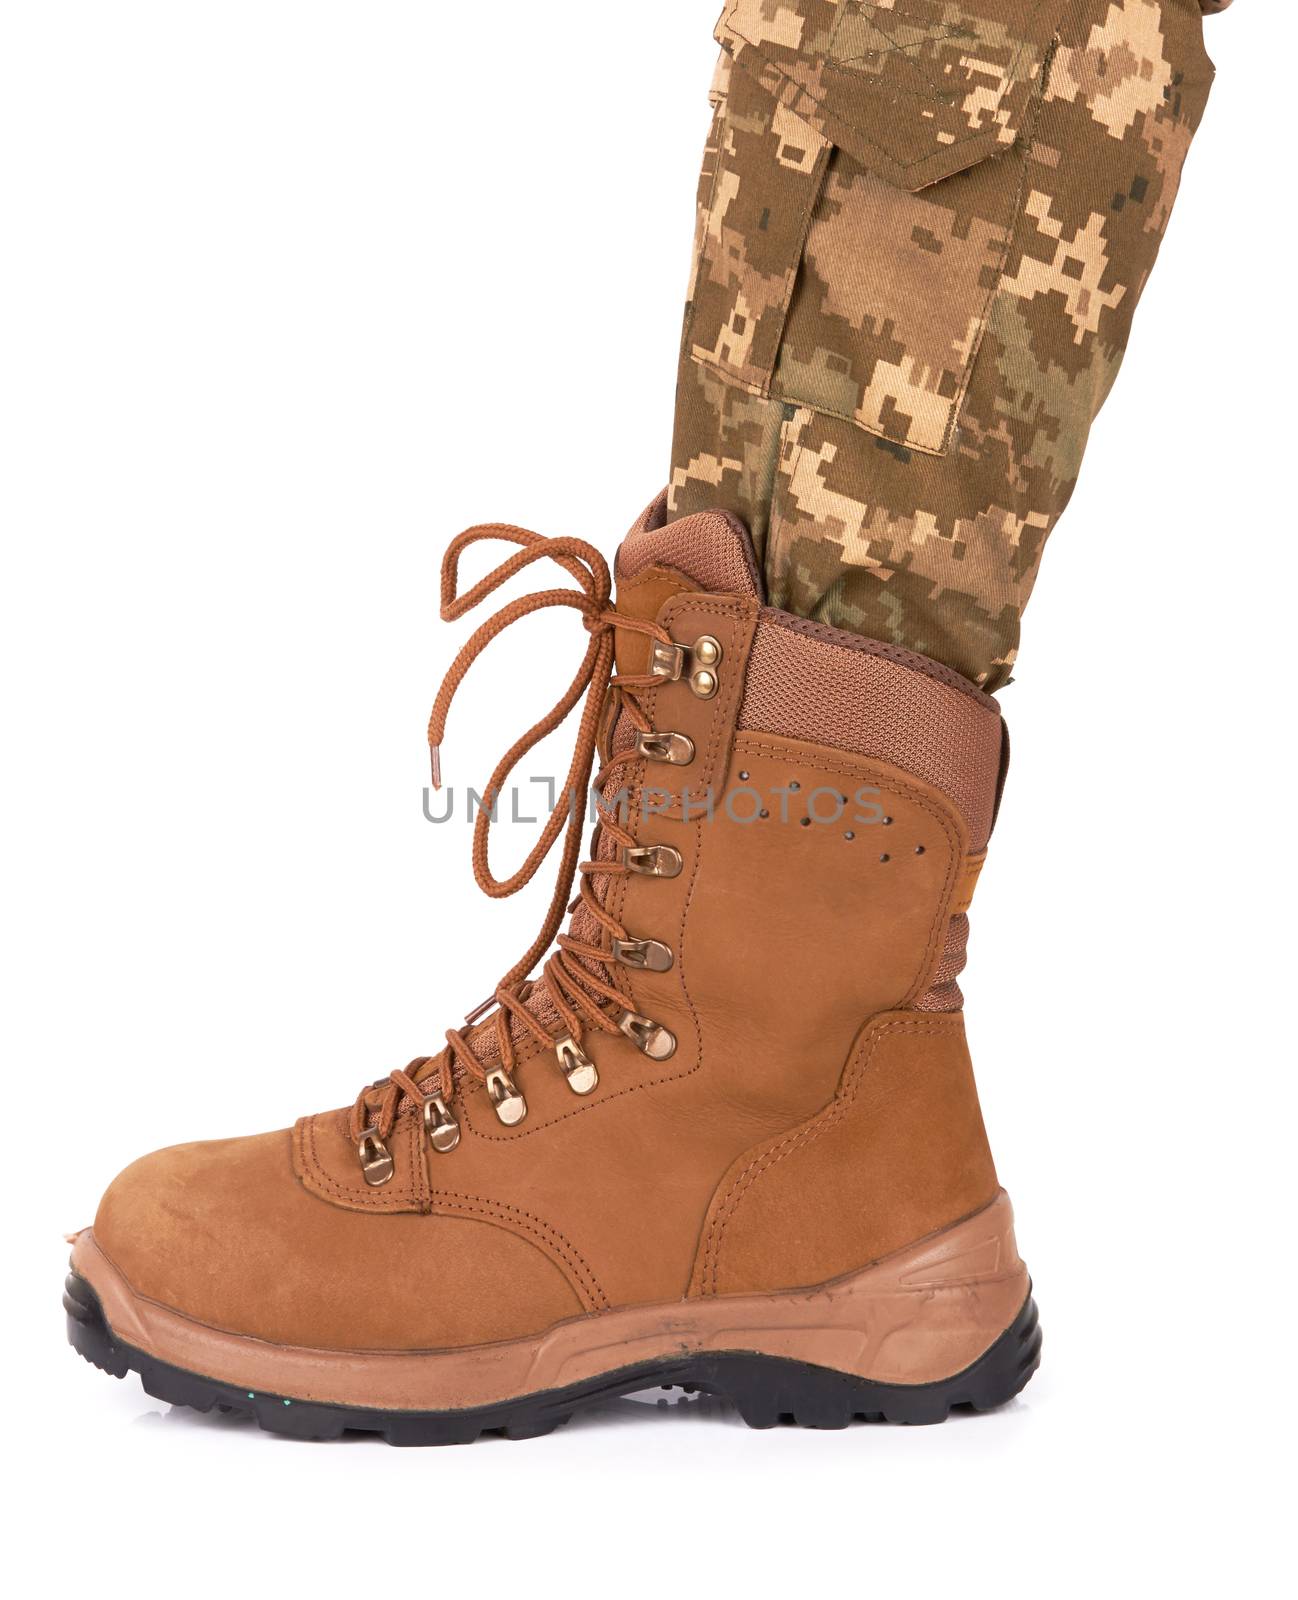 soldier leg in  army boot isolated on white background